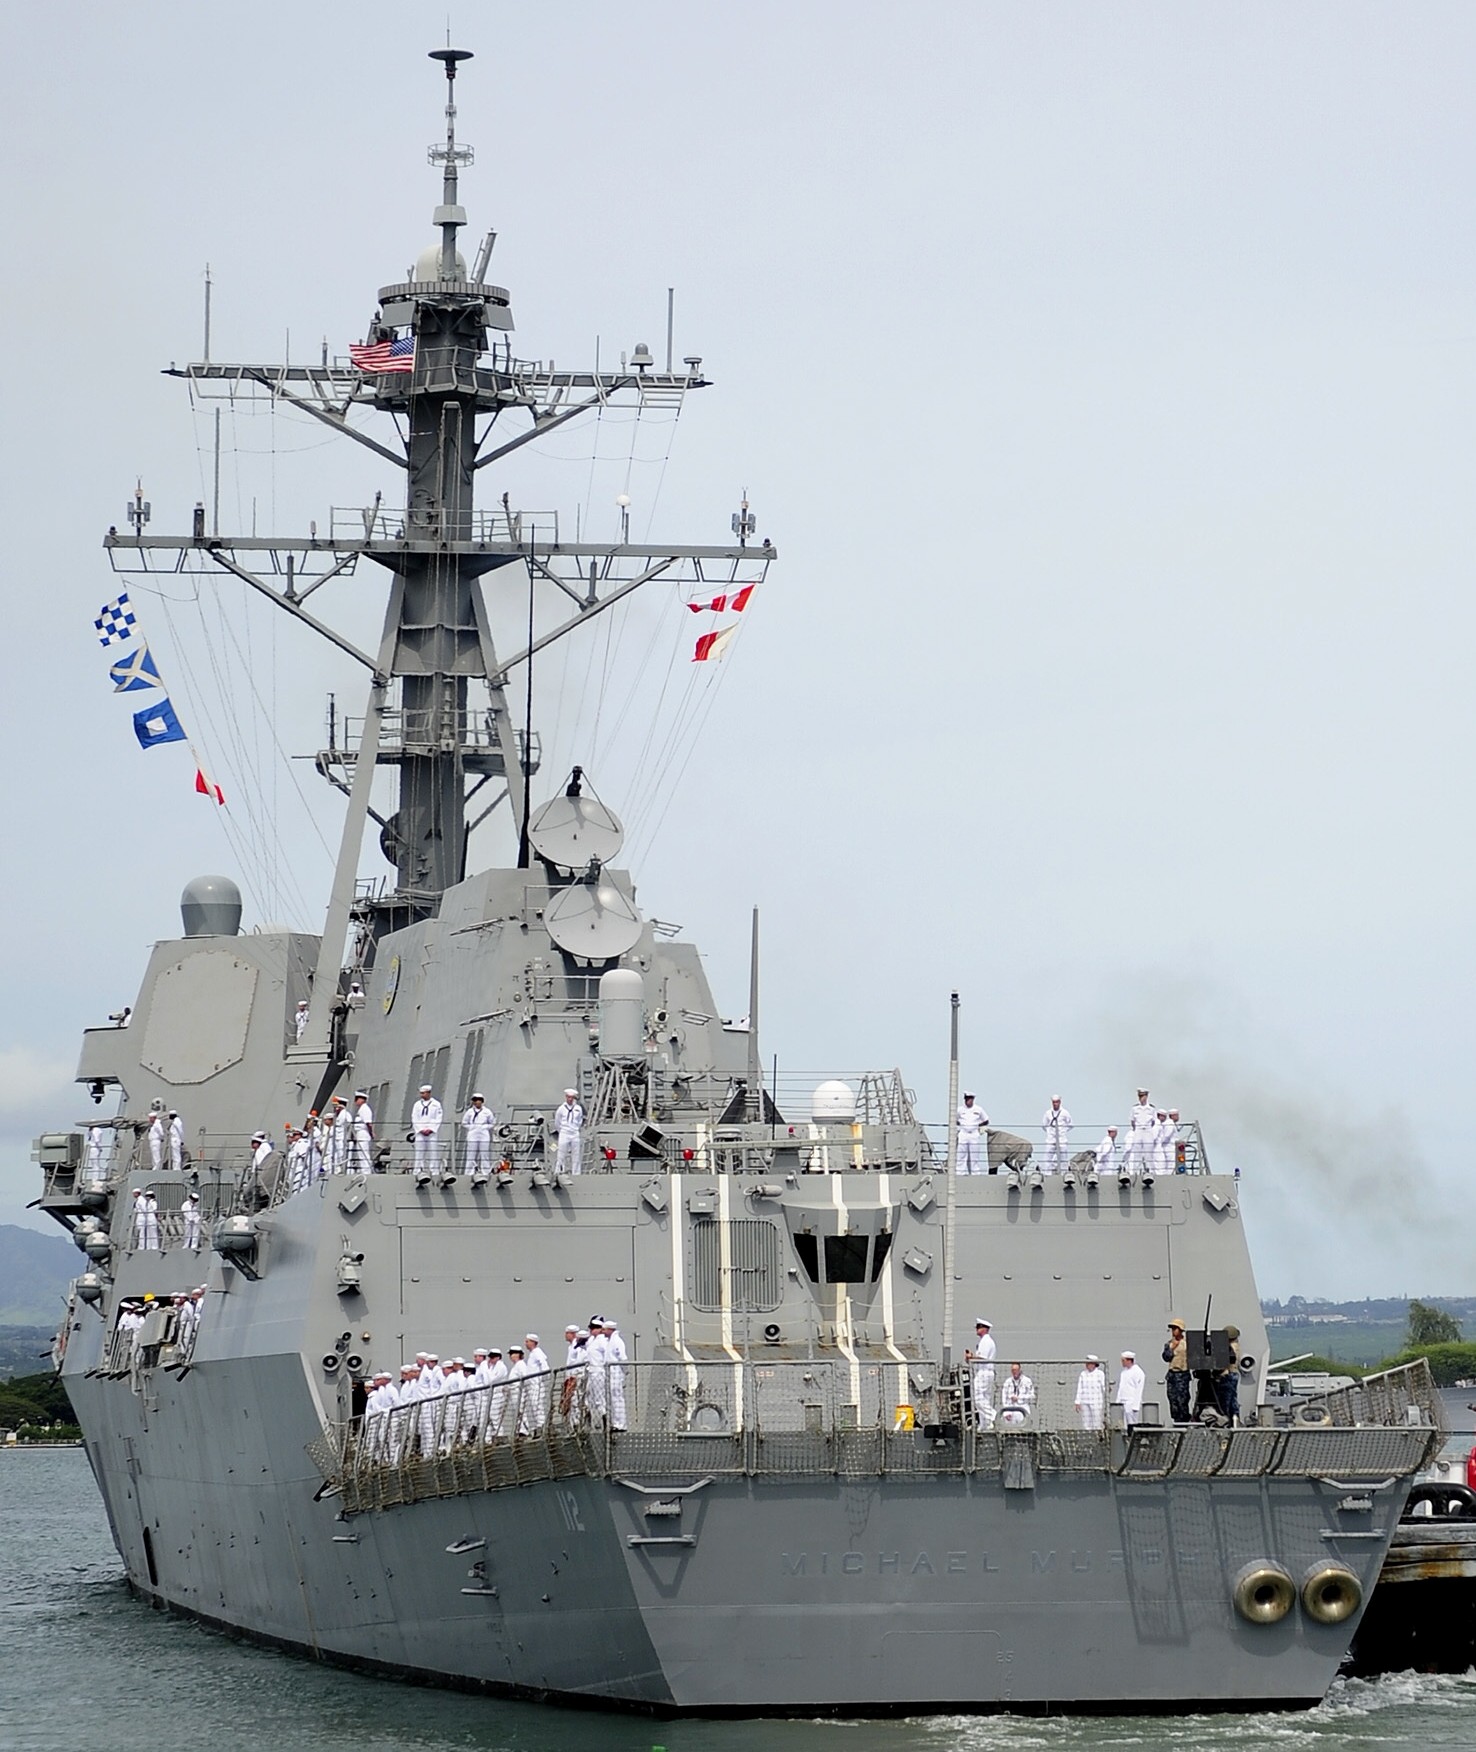 ddg-112 uss michael murphy arleigh burke class guided missile destroyer aegis us navy 22